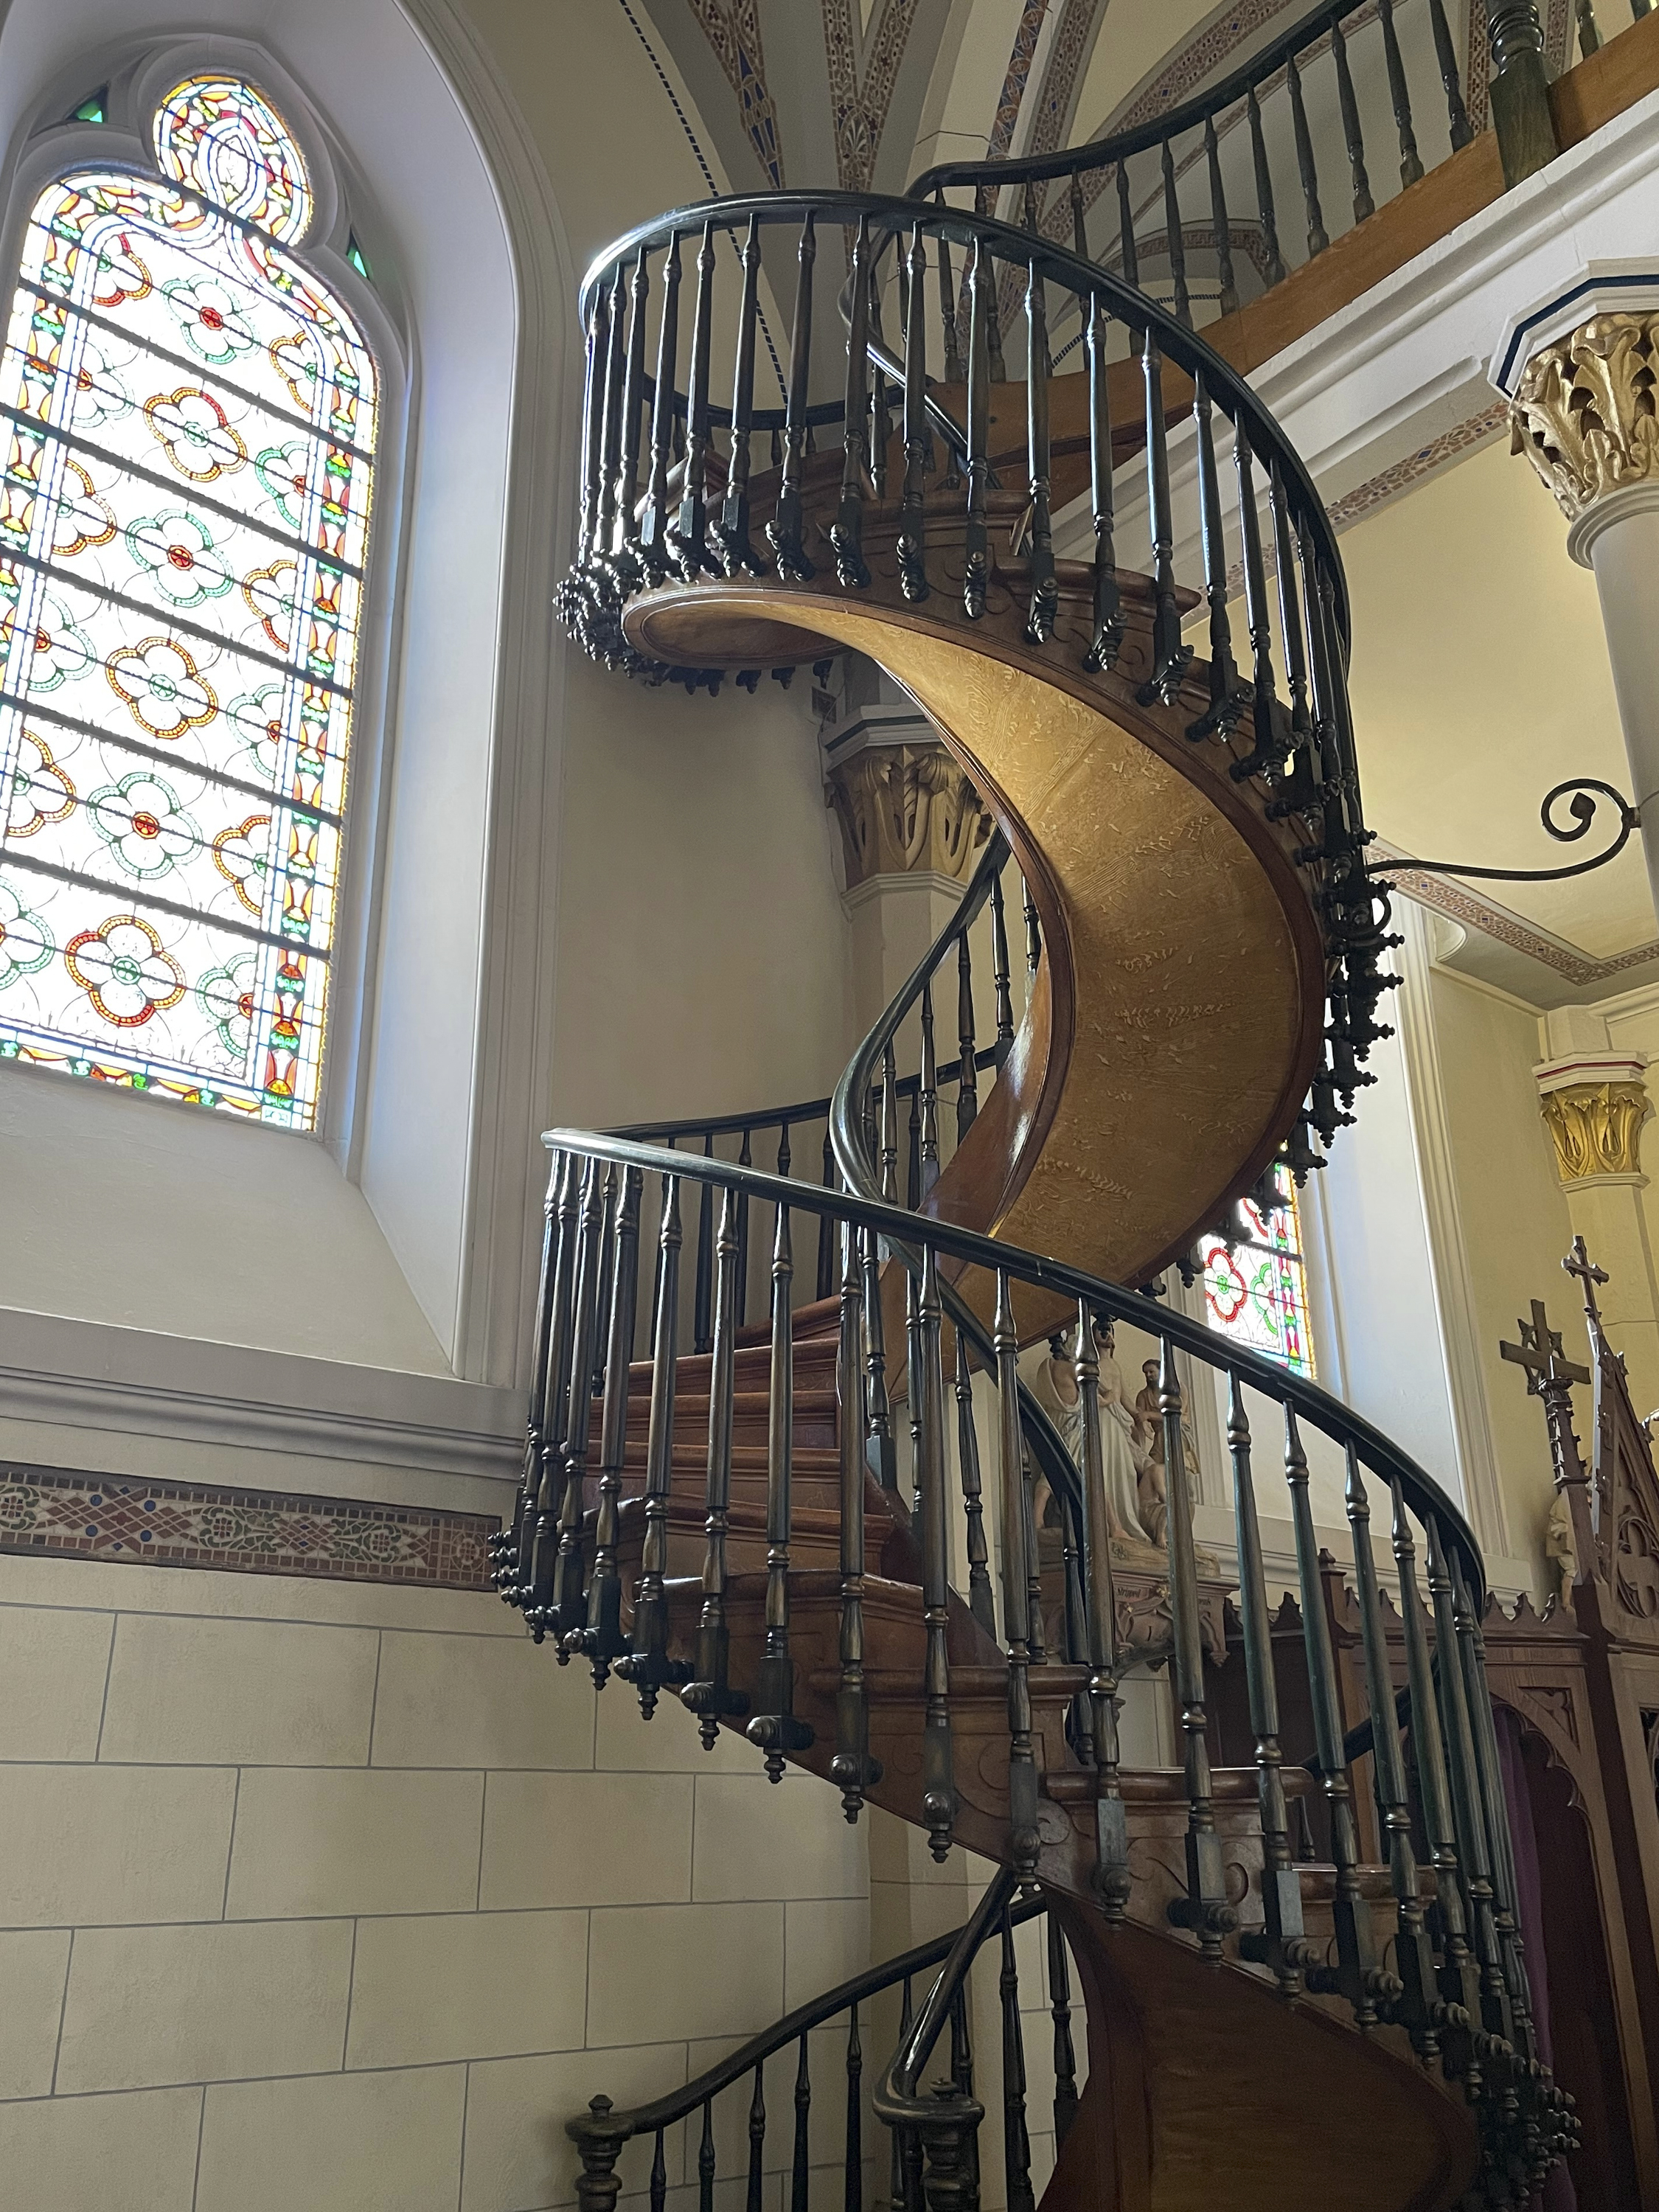 The staircase, which is around six meters high, takes two full turns over its axis until it reaches the choir. It was built without any nails or glue, and lacks any kind of central support. The construction itself is said to be impossible.